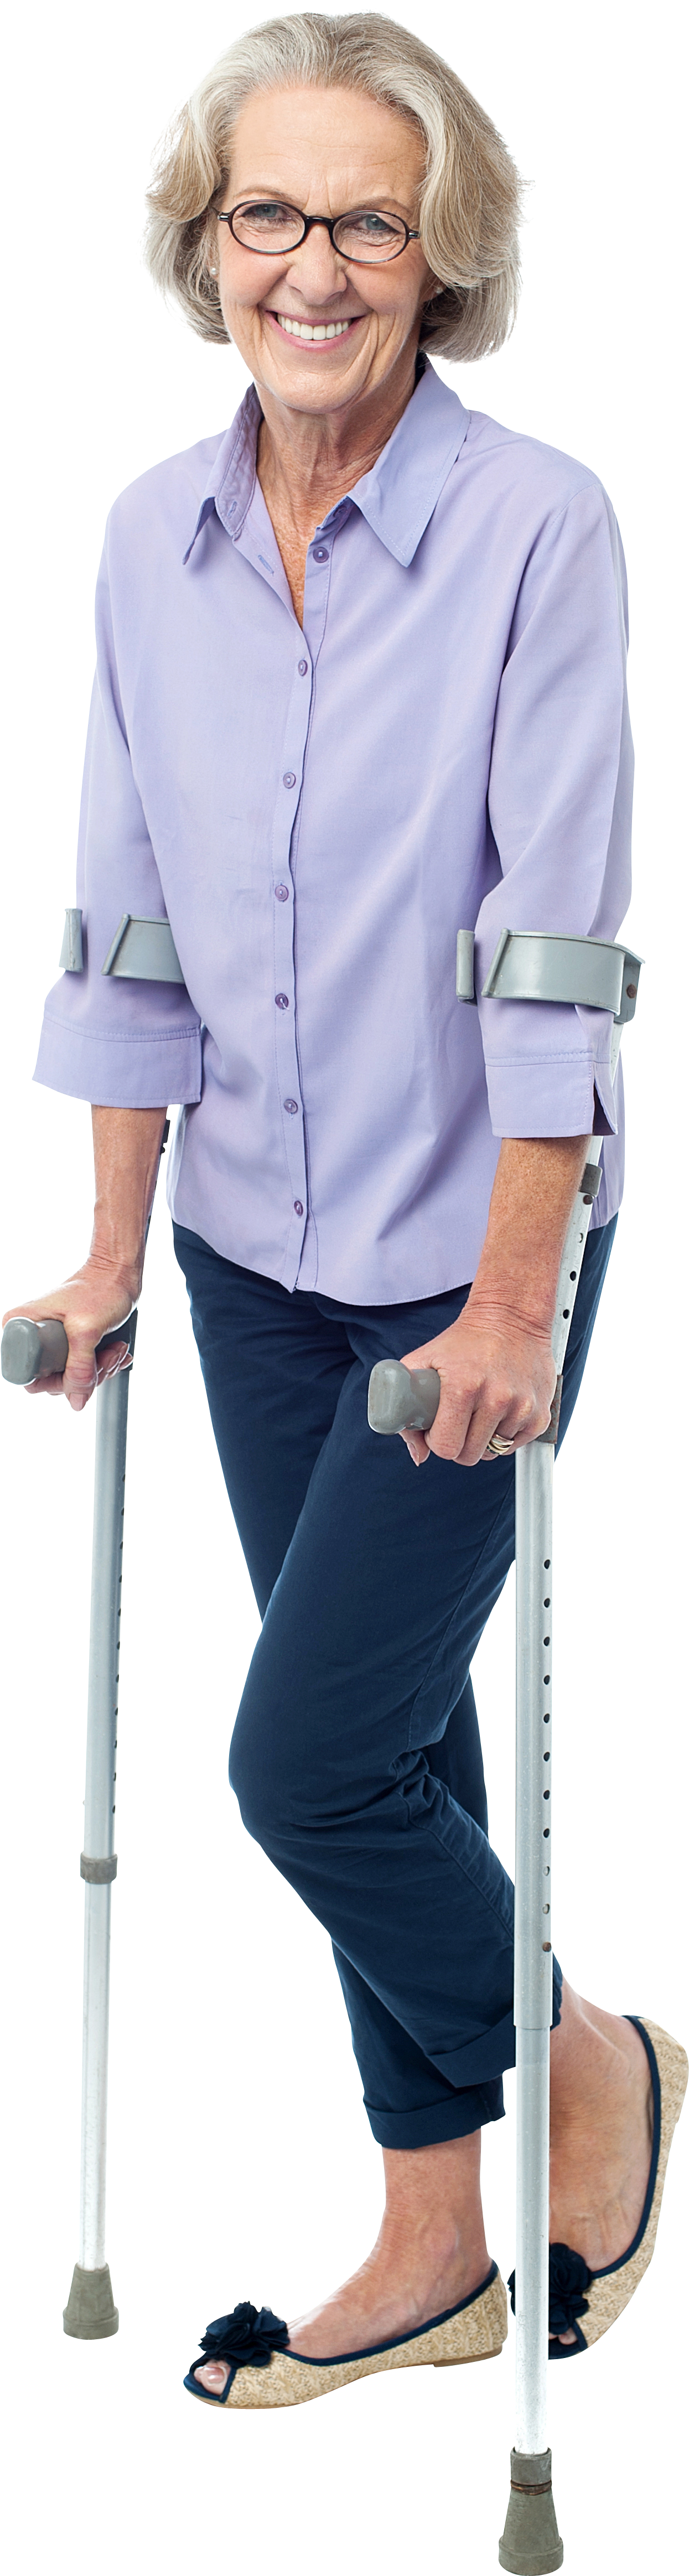 Smiling Senior Woman With Crutches PNG image